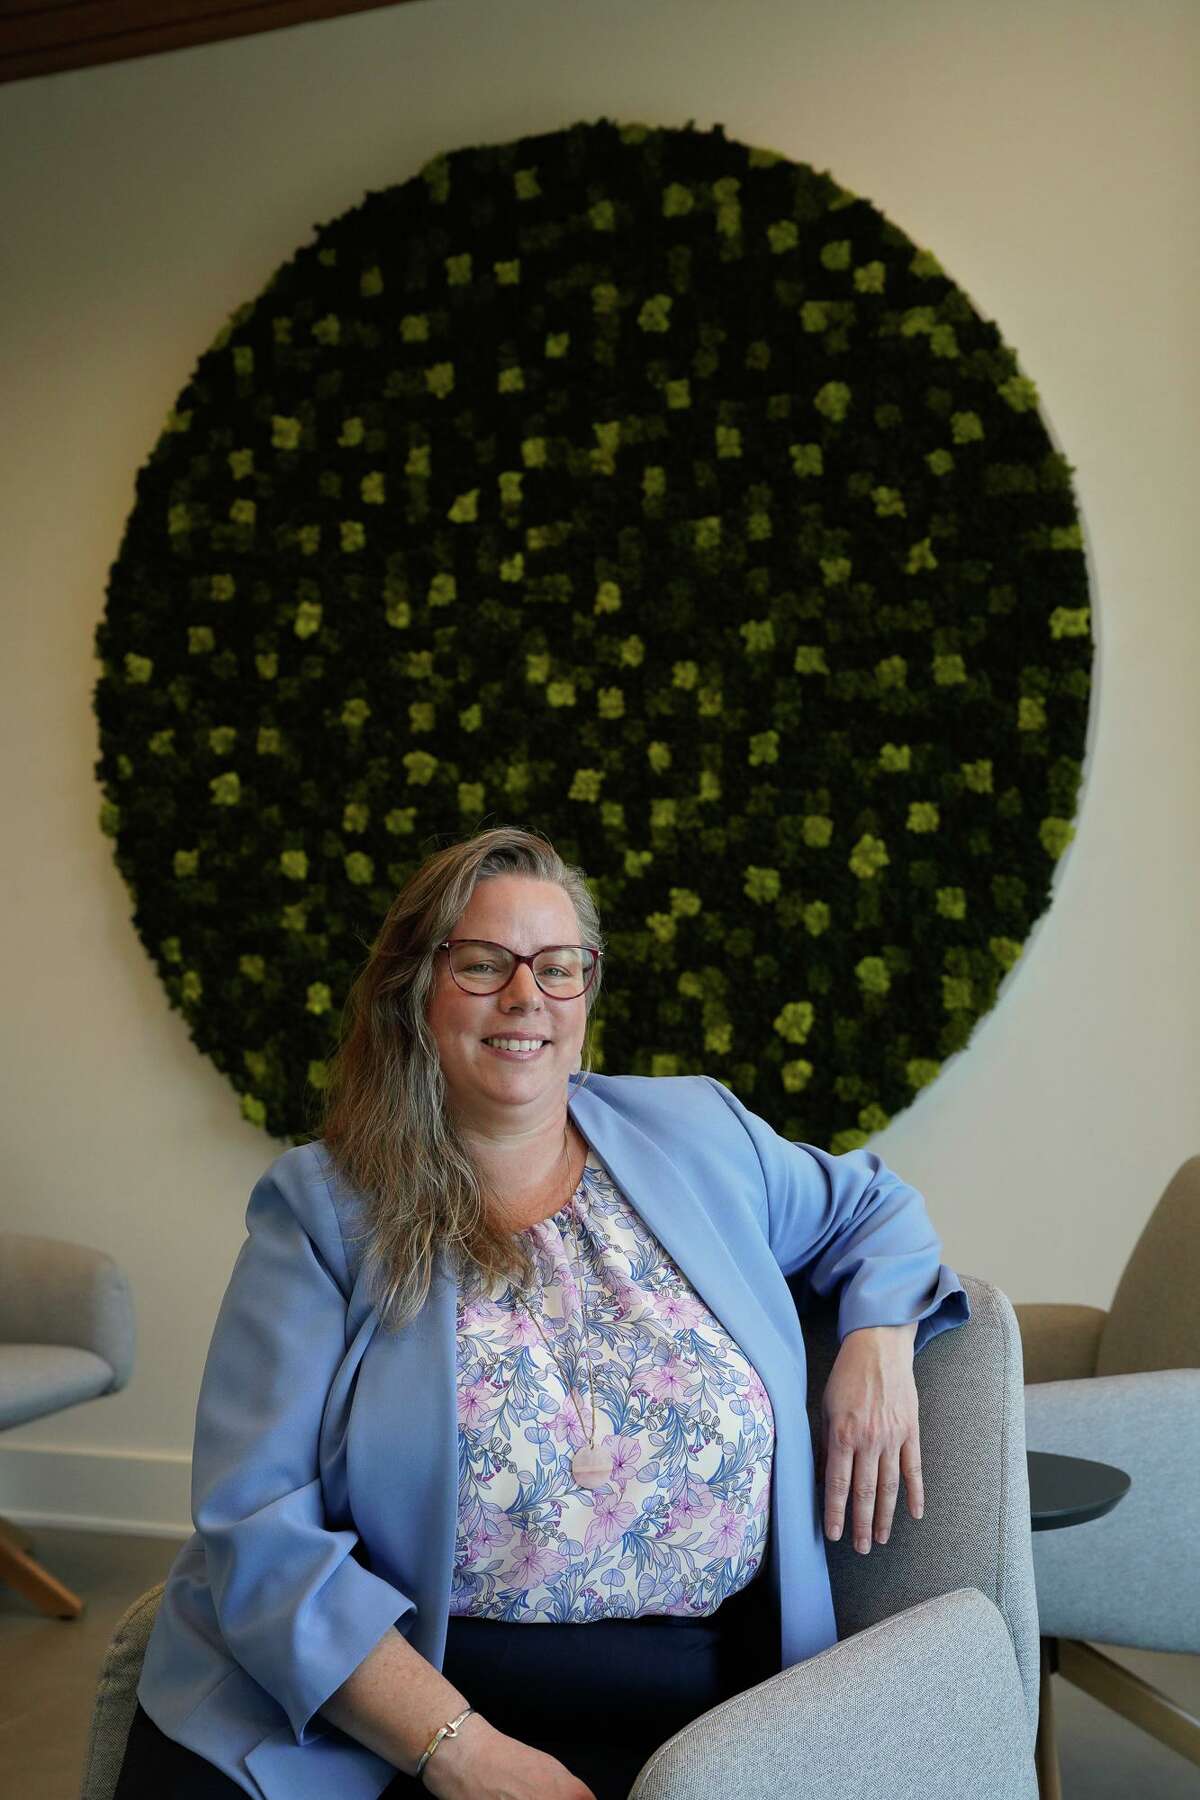 Navy veteran Jill Palmer is the chief of behavioral health at Endeavors Veteran Wellness Center, which offers health and wellness resources for veterans.